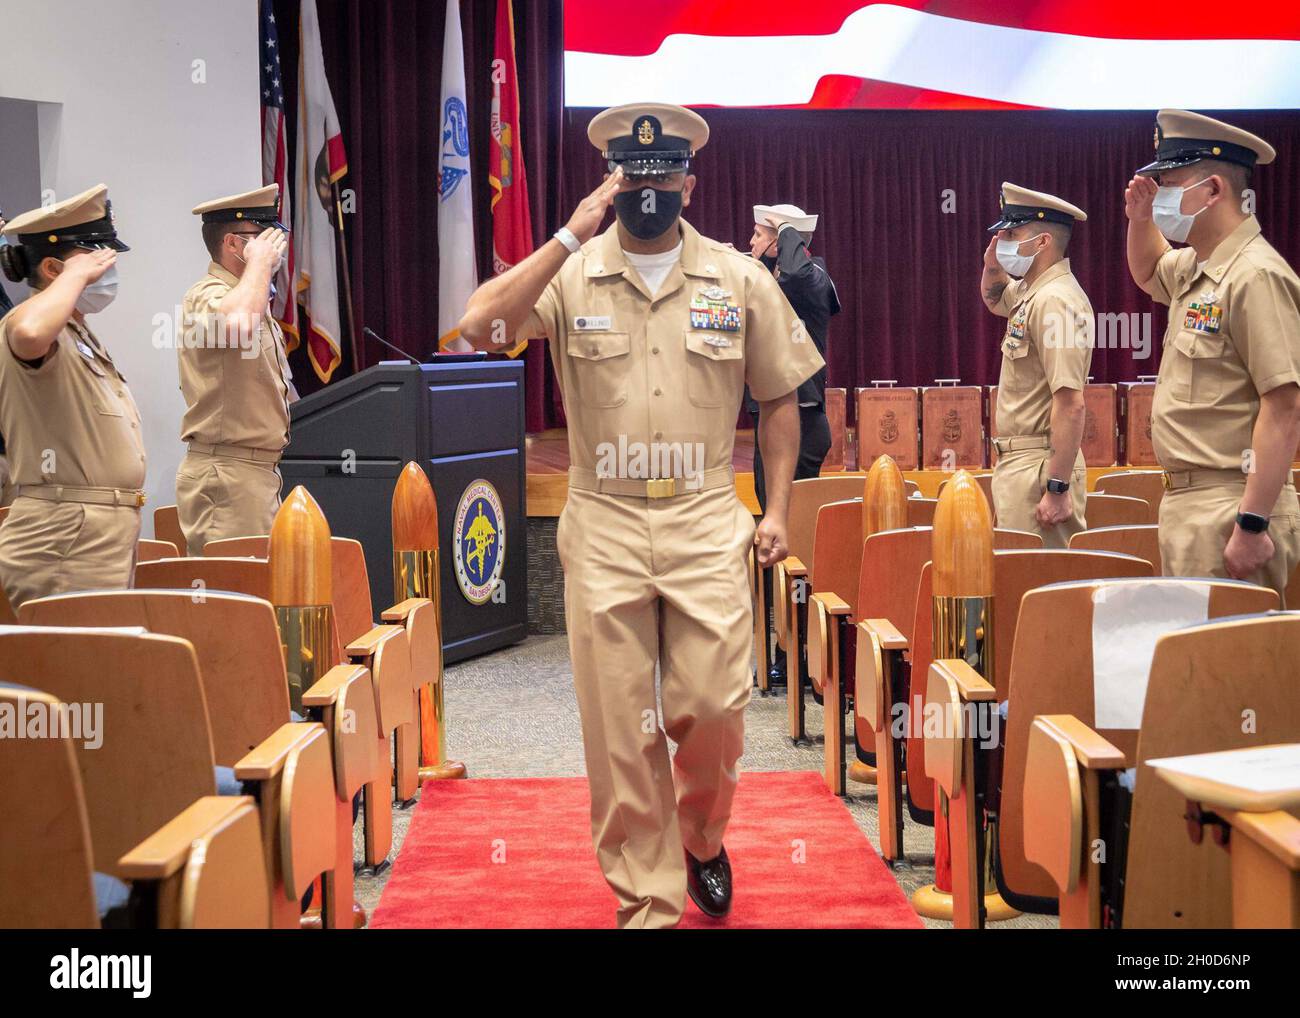 210129-N-DA693-1057  SAN DIEGO (Jan. 29, 2021) Chief Hospital Corpsman Anthony Killings salutes after being pinned to the rank of chief petty officer during a ceremony on board Navy Medicine & Readiness Training Center San Diego (NMRTC) Jan. 29. Due to the COVID-19 pandemic, the ceremony was livestreamed via video teleconference (VTC) and Facebook Live allowing family, friends and staff to participate while adhering to social distancing guidelines set forth from the Centers for Disease Control (CDC). The COVID-19 pandemic has changed the ways of how to conduct business and NMRTC has adapted so Stock Photo